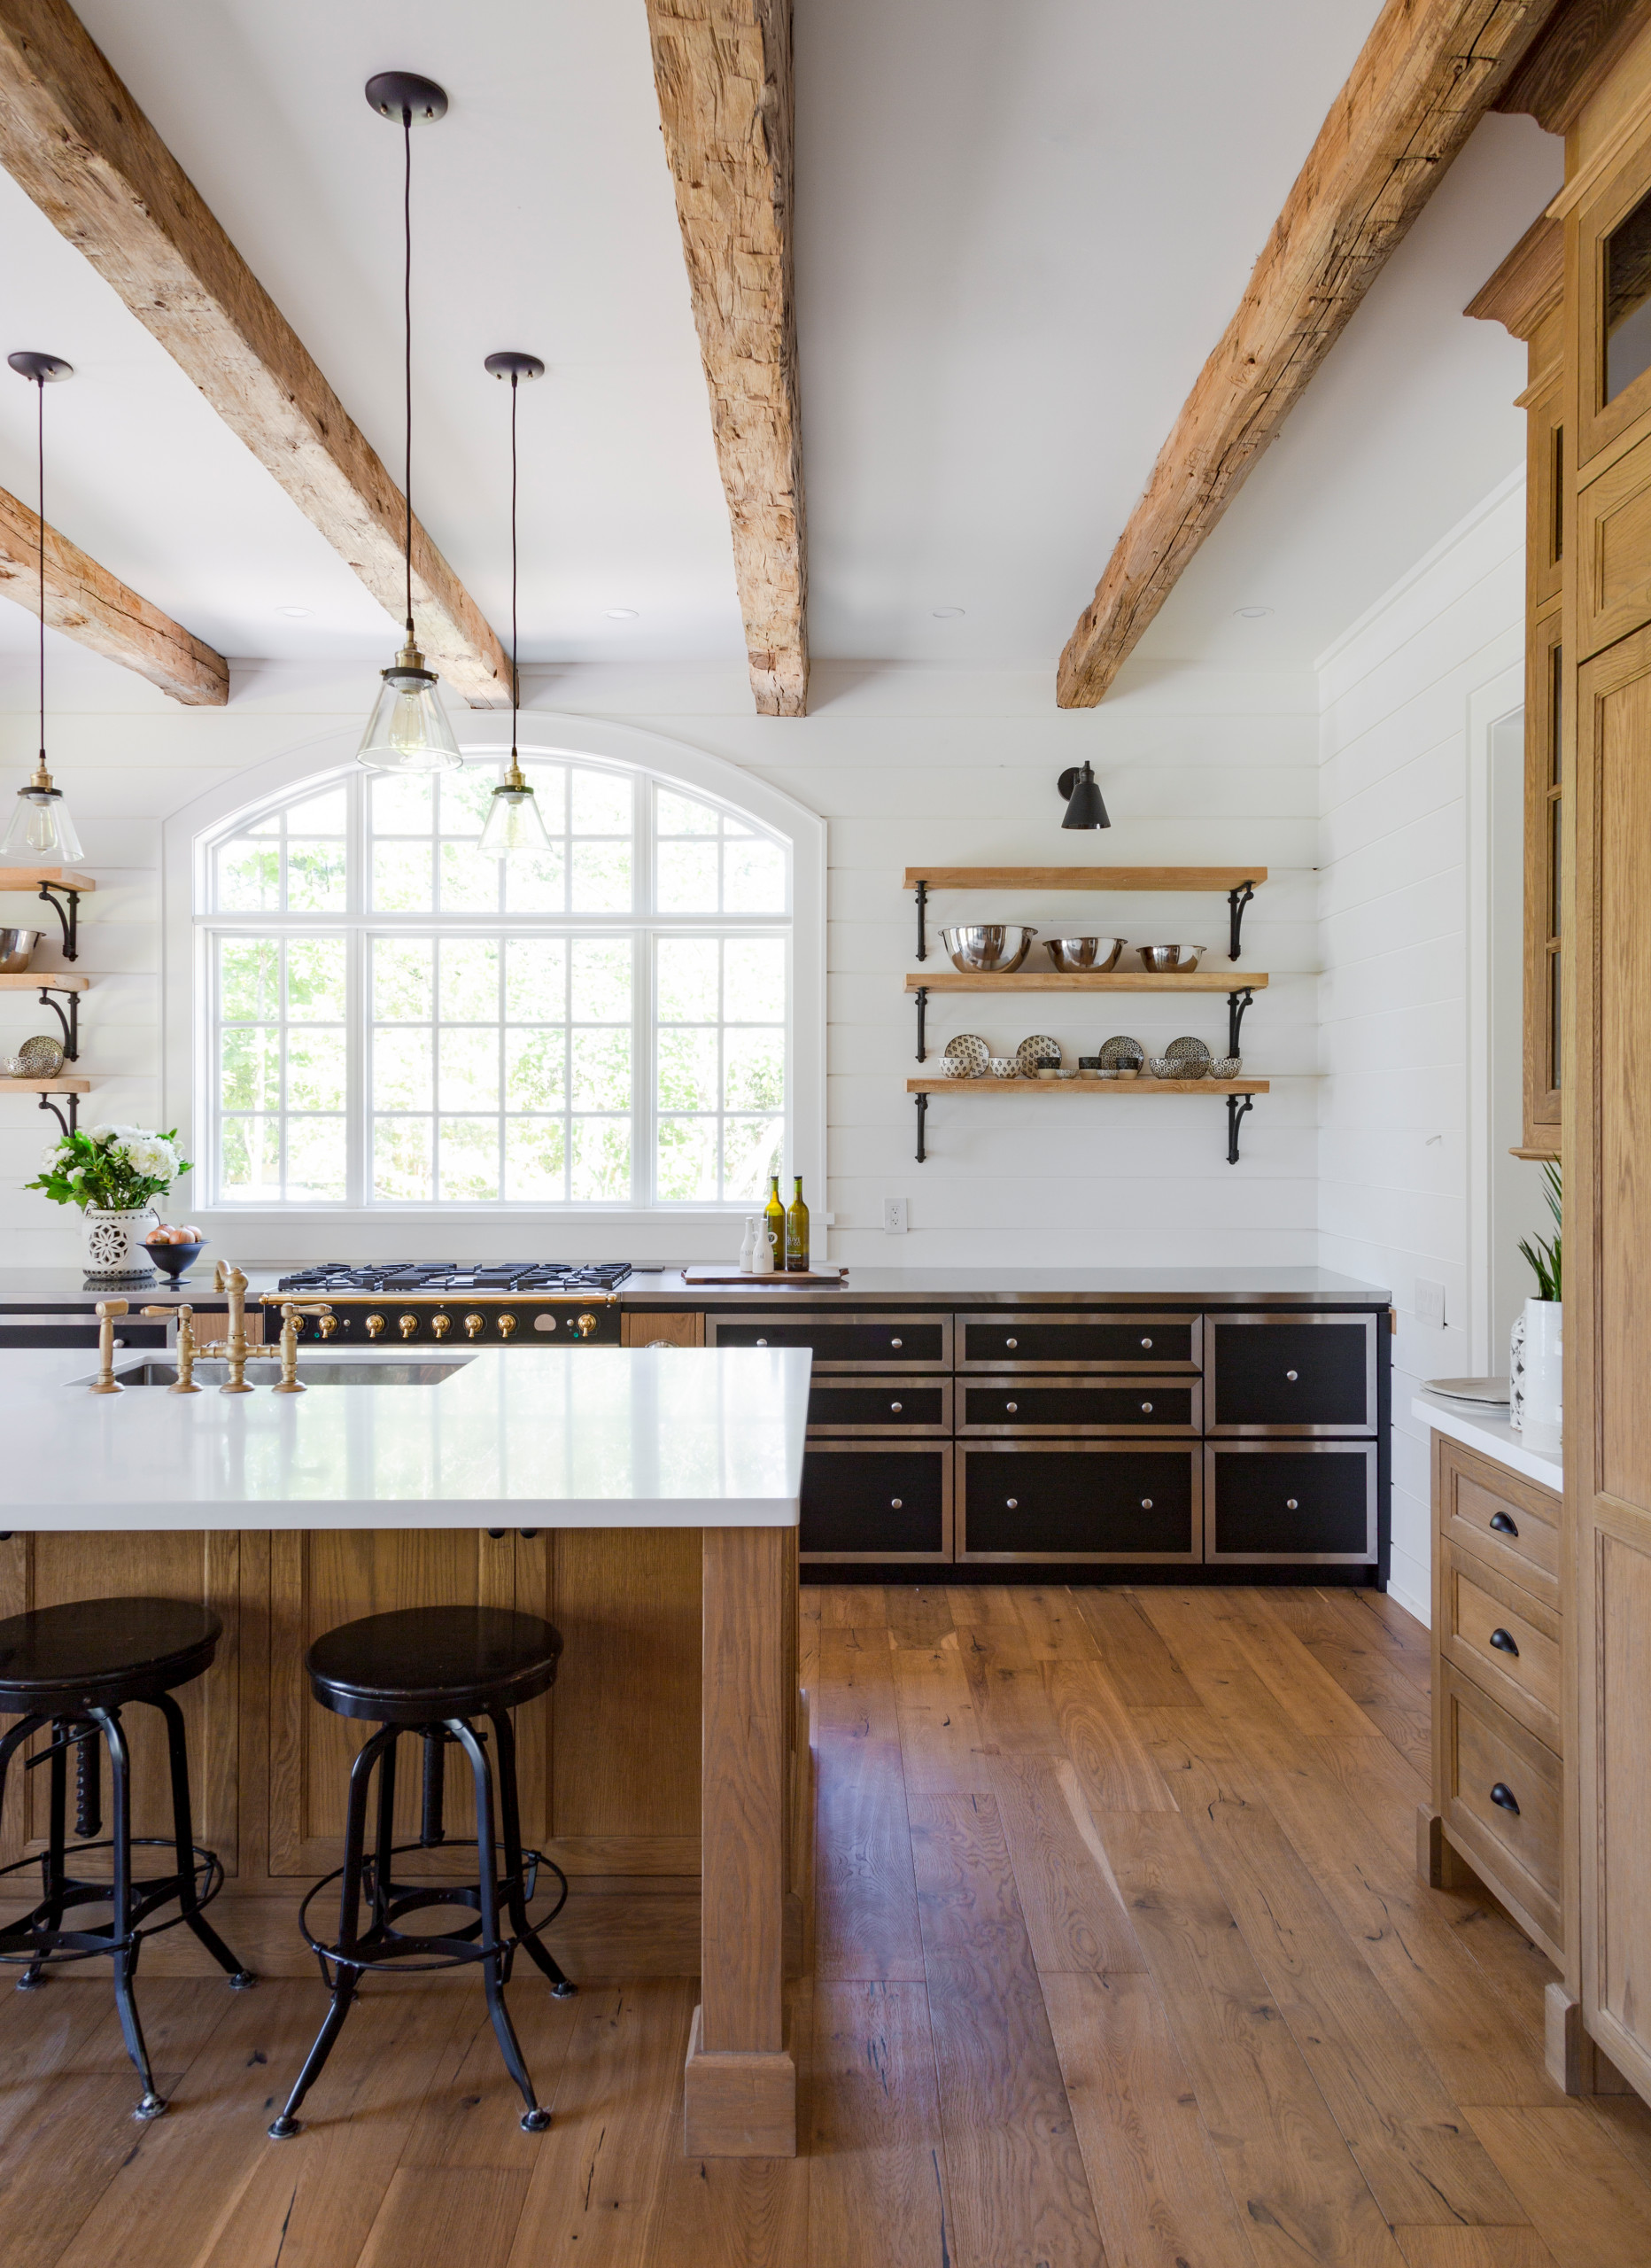 28 rustic kitchen ideas for one-off rural charm